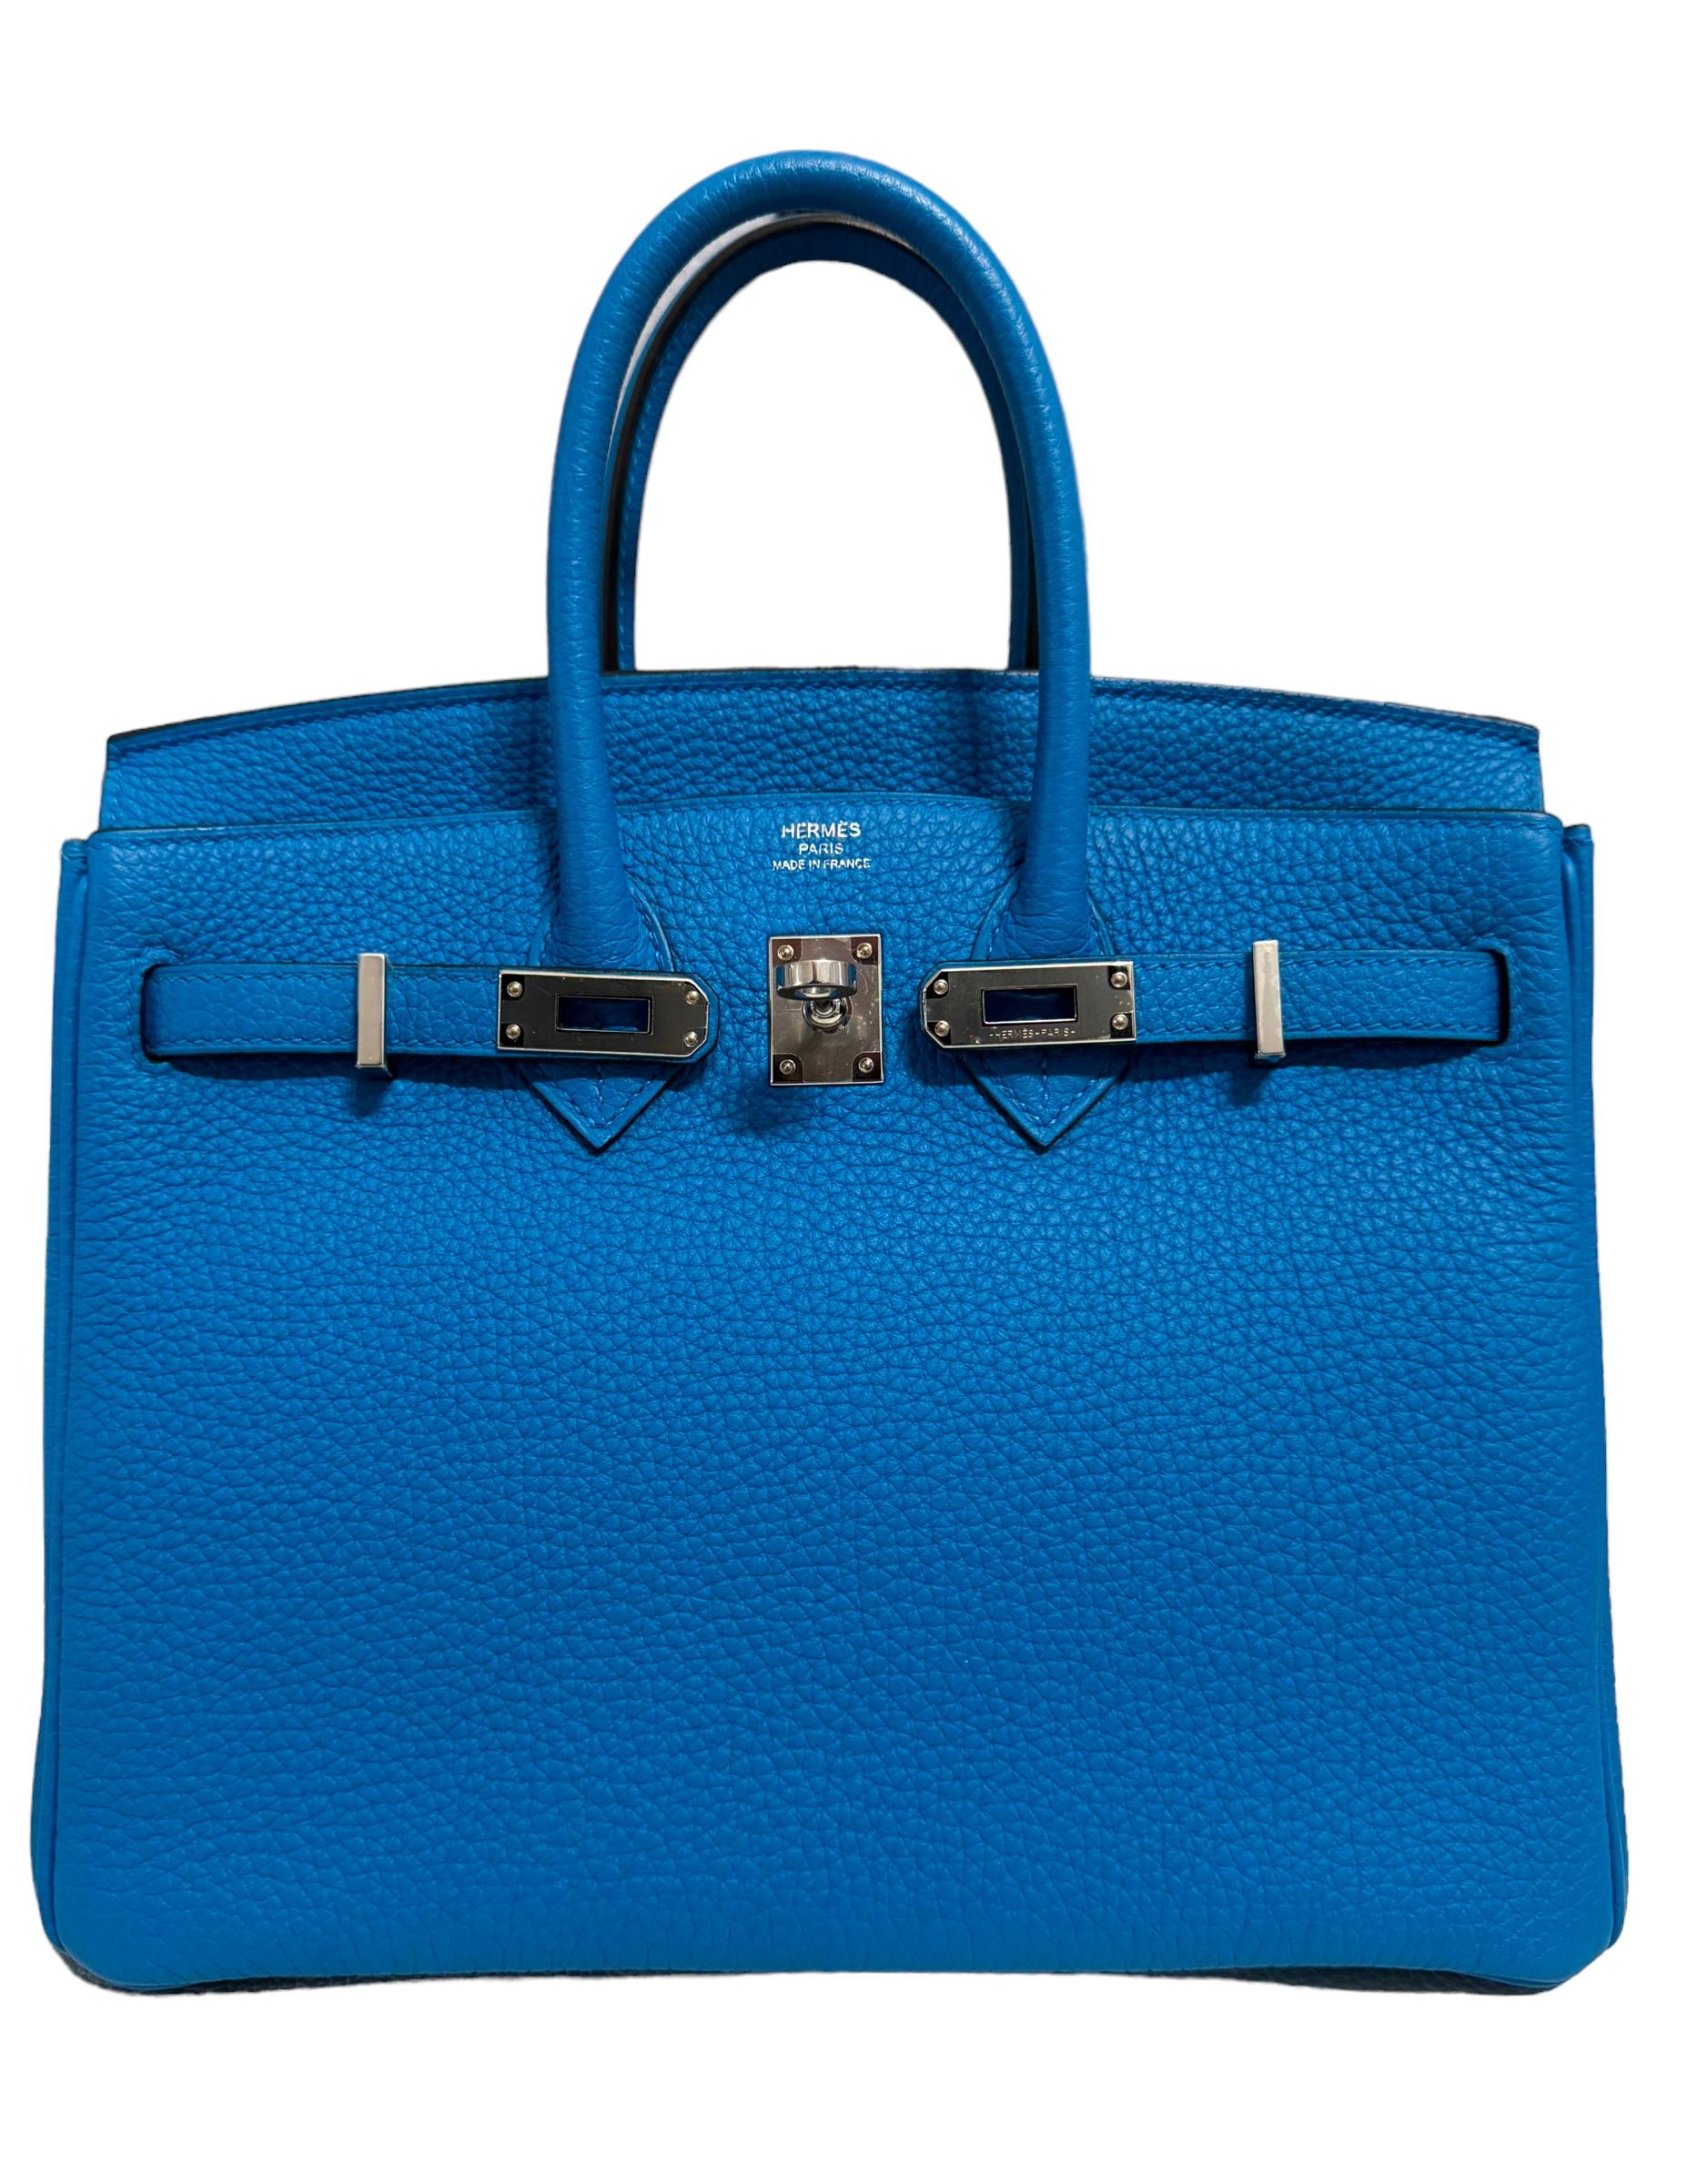 Absolutely Rare Stunning Highly Coveted Pristine Hermes Birkin 25 BlueZanzibar Togo Leather complimented by Palladium Hardware. Pristine Condition Plastic on Hardware, excellent structure and corners. Worn only a few times. From Collectors Closet.